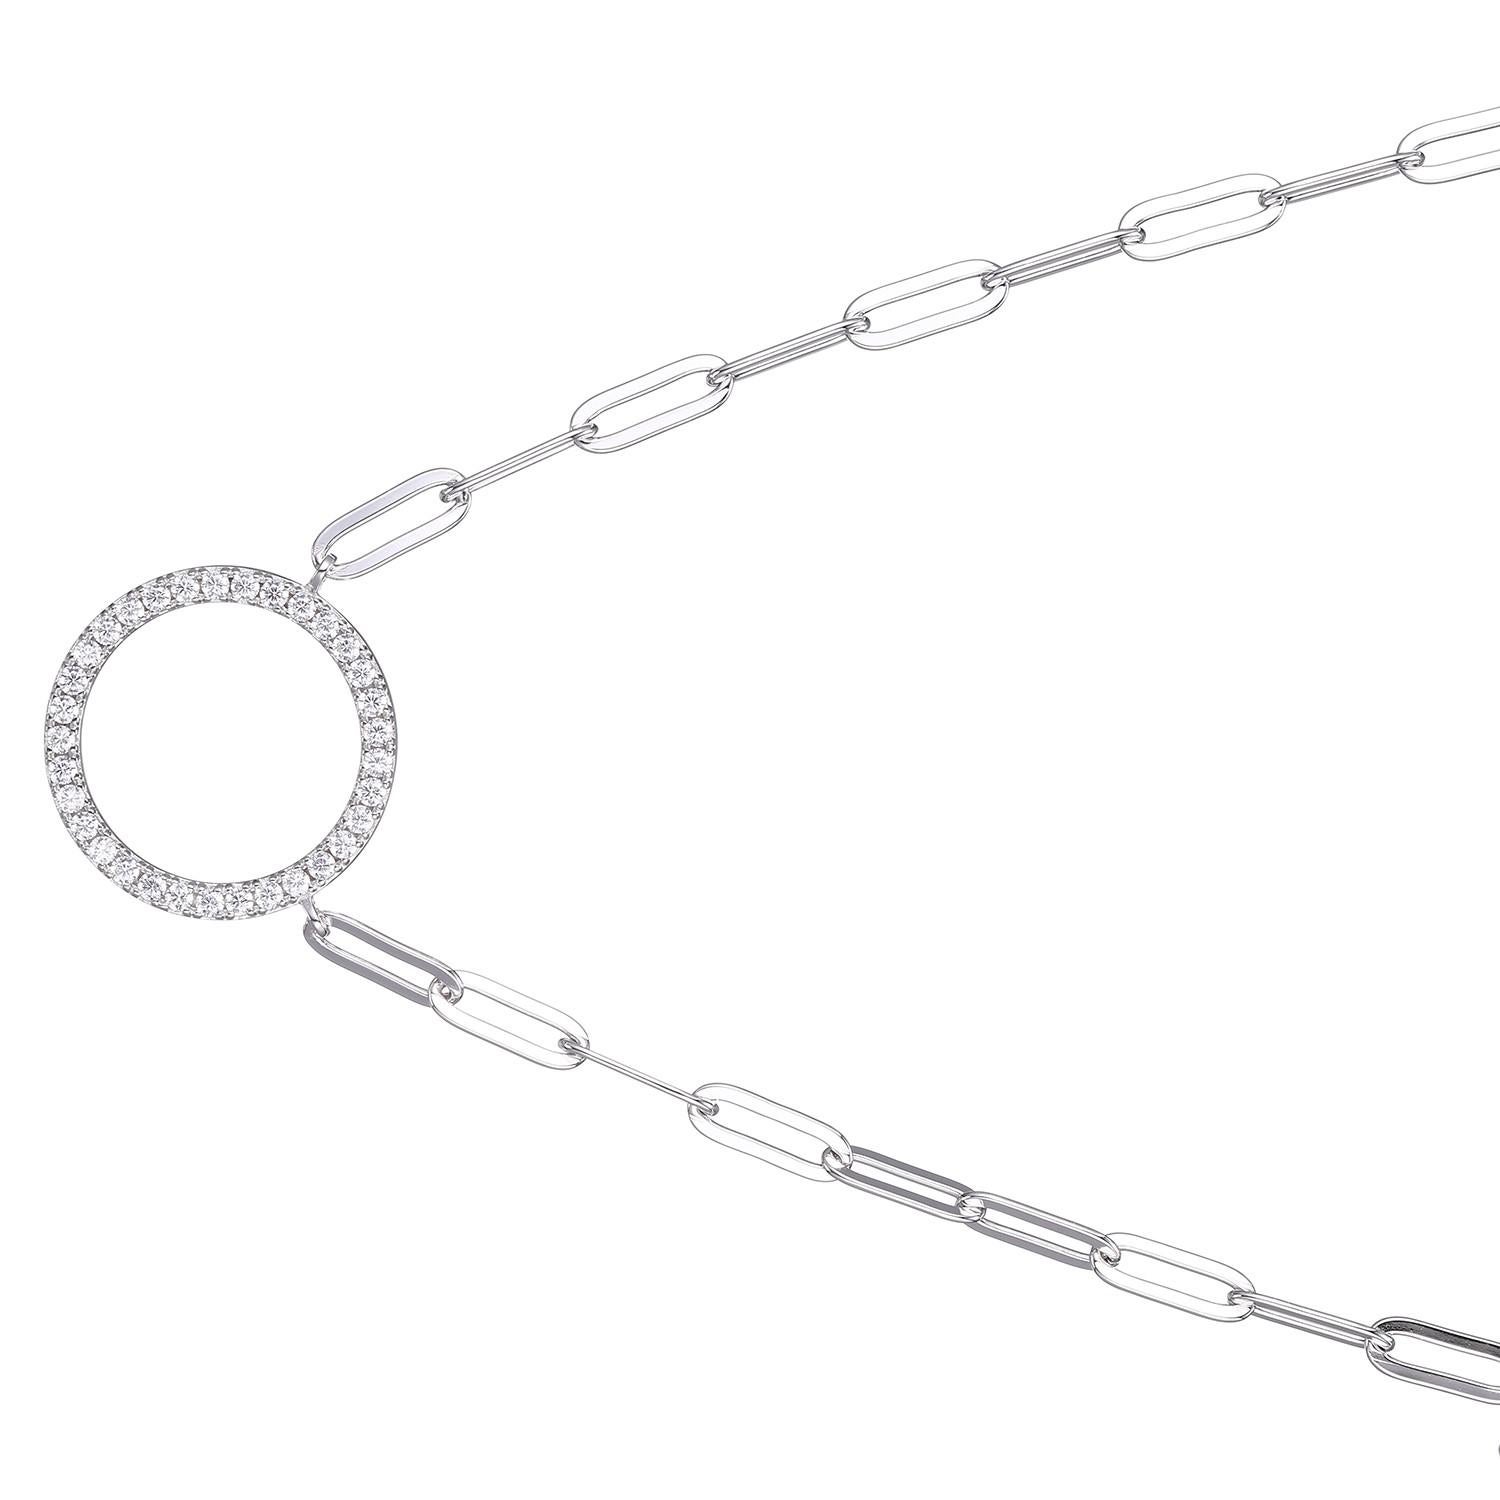 Sterling Silver Necklace made with Paperclip Chain (3mm) and CZ Circle (19mm) in Center, Measures 17